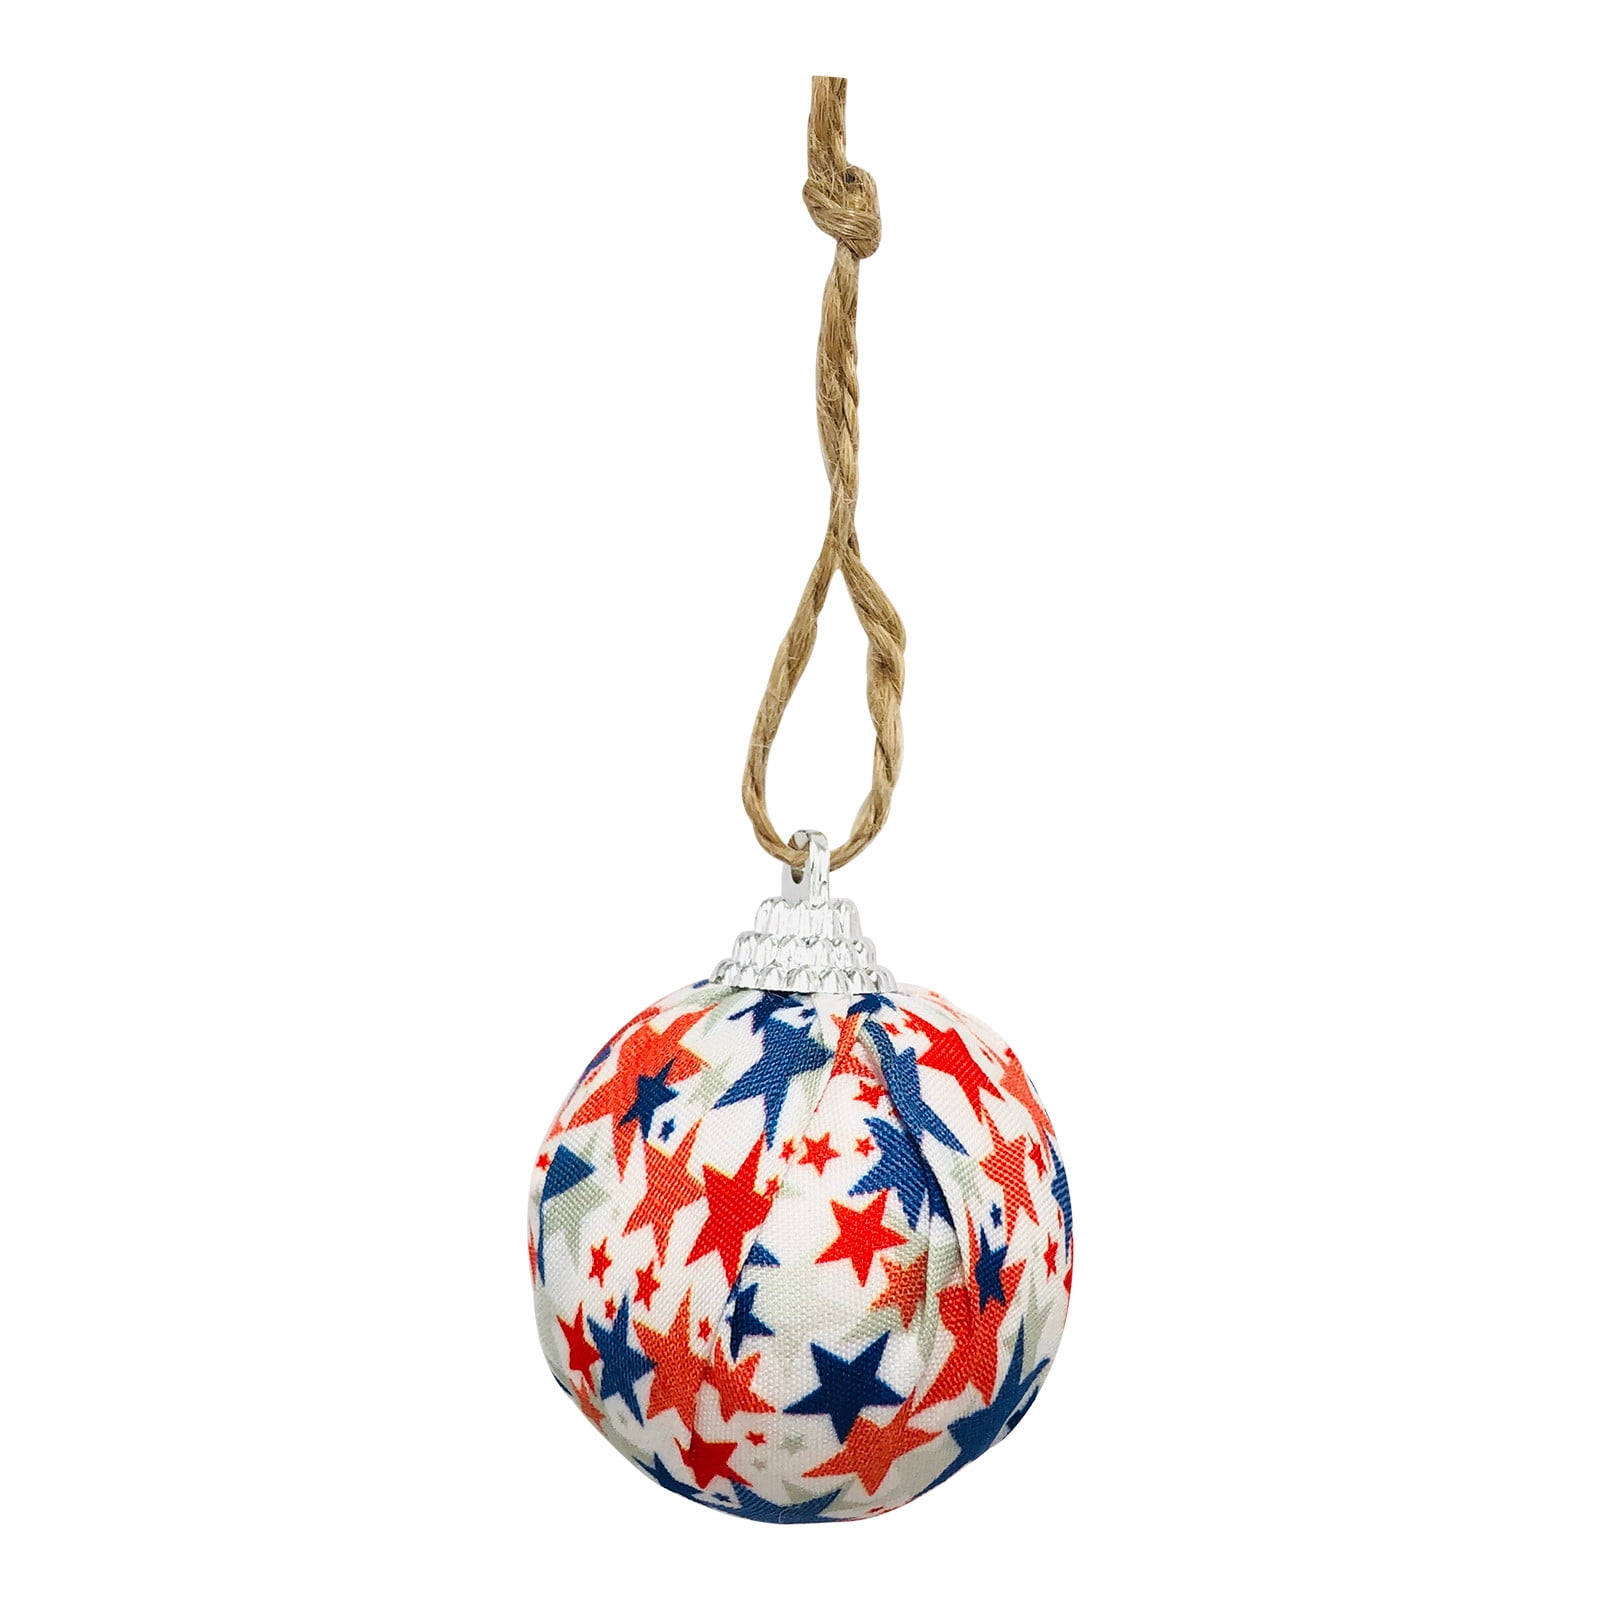 OAVQHLG3B 6 Pieces 4th of July Patriotic Ball Ornaments Independence Day Hanging Balls Patriotic US Star Ball American Flag Ball for Independence Day Party Decorations